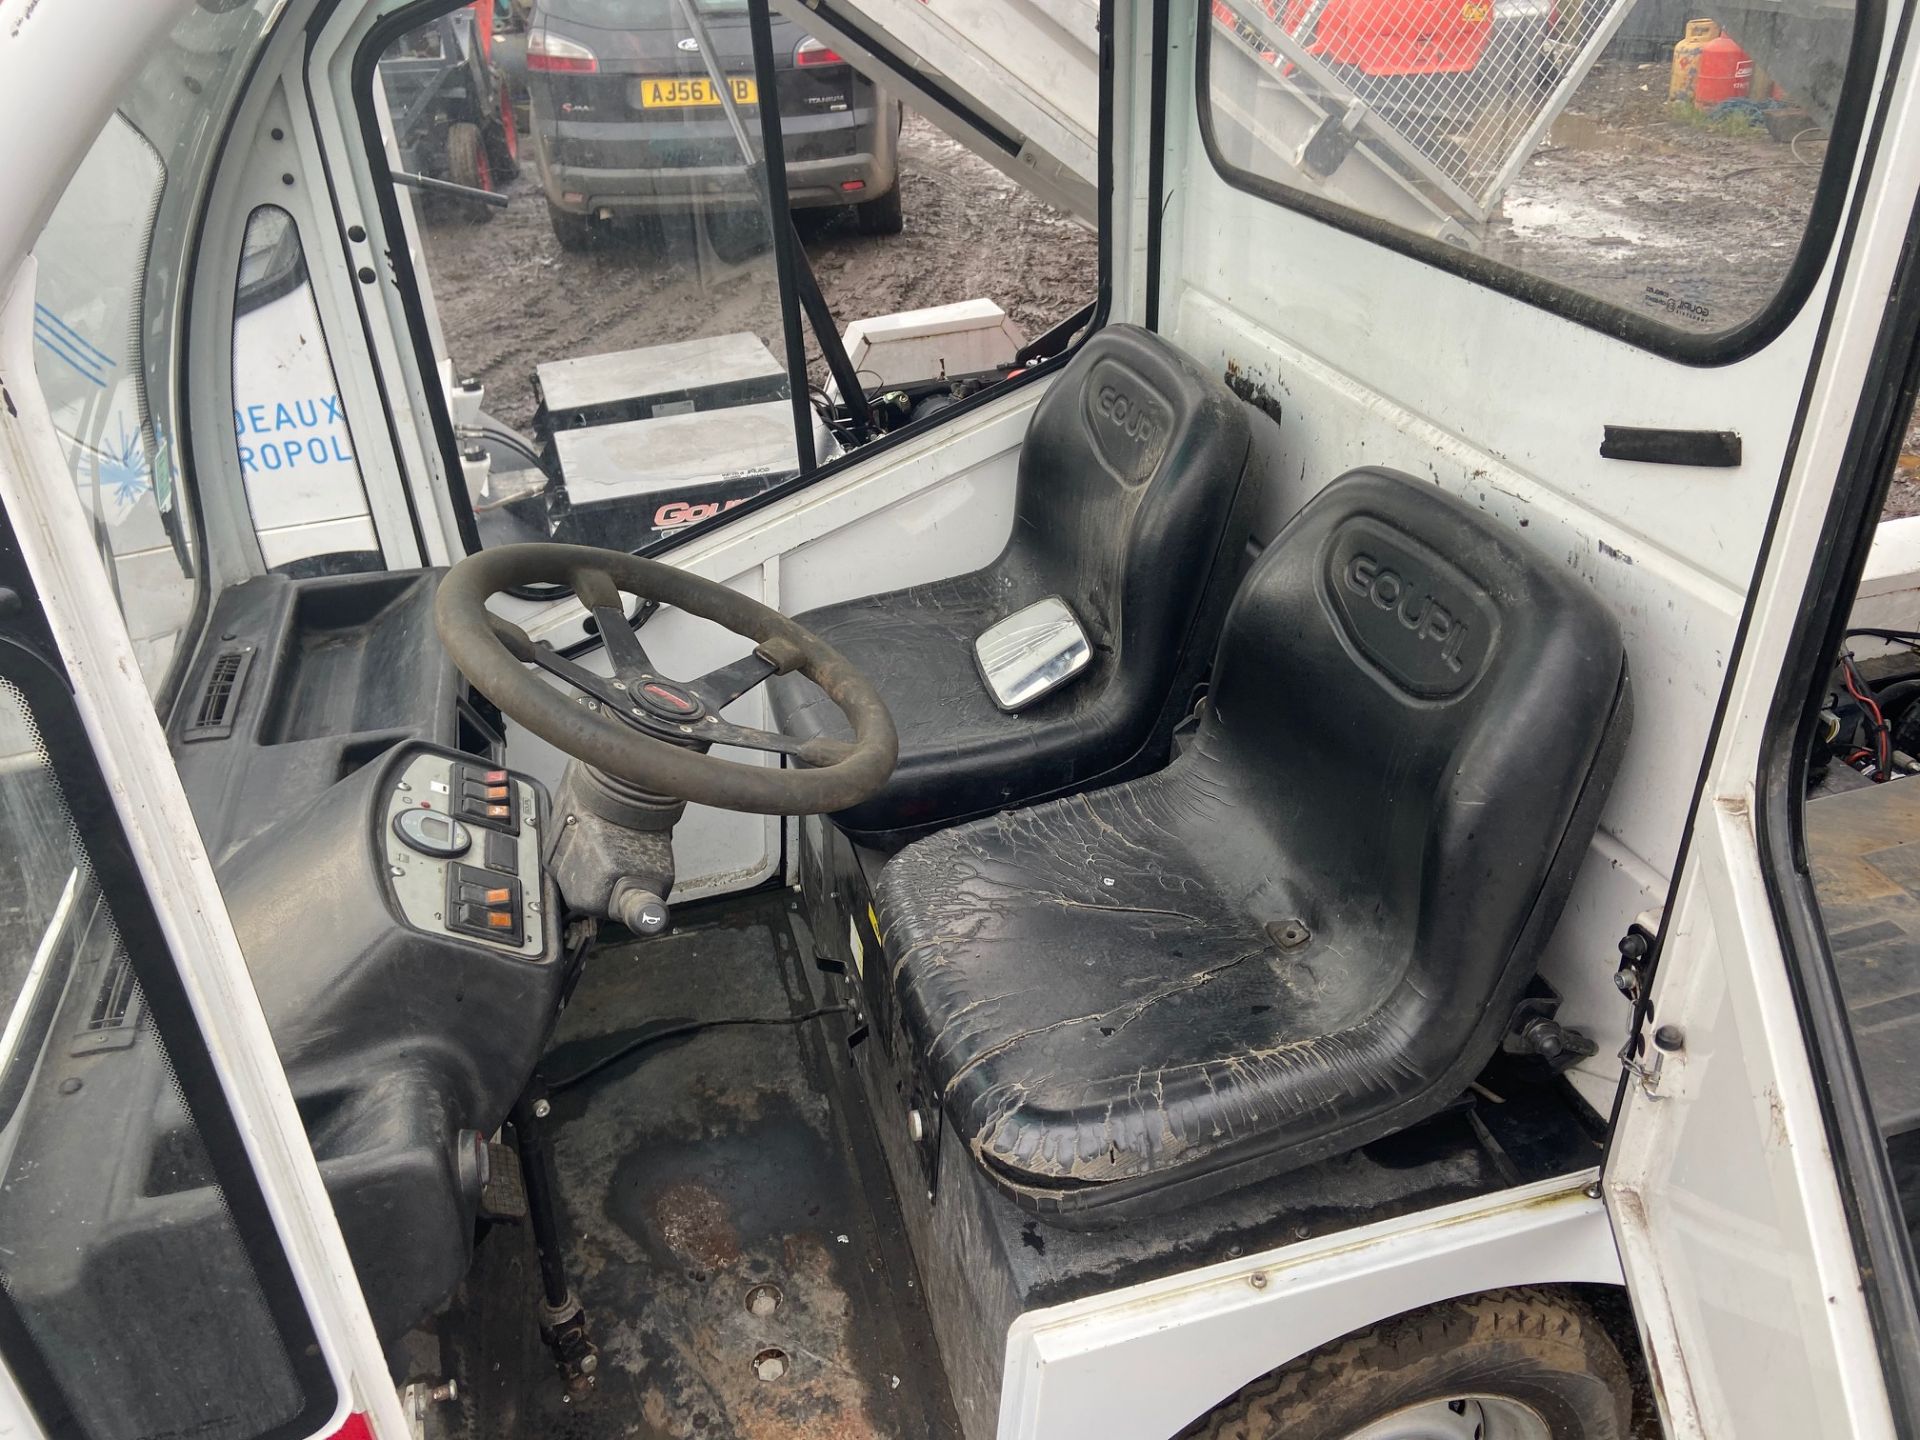 2 X GROUPIL G3 ELECTRIC TIPPER TRUCKS FOR SPARES / REPAIRS. FRENCH REGISTERED *PLUS VAT* - Image 7 of 7